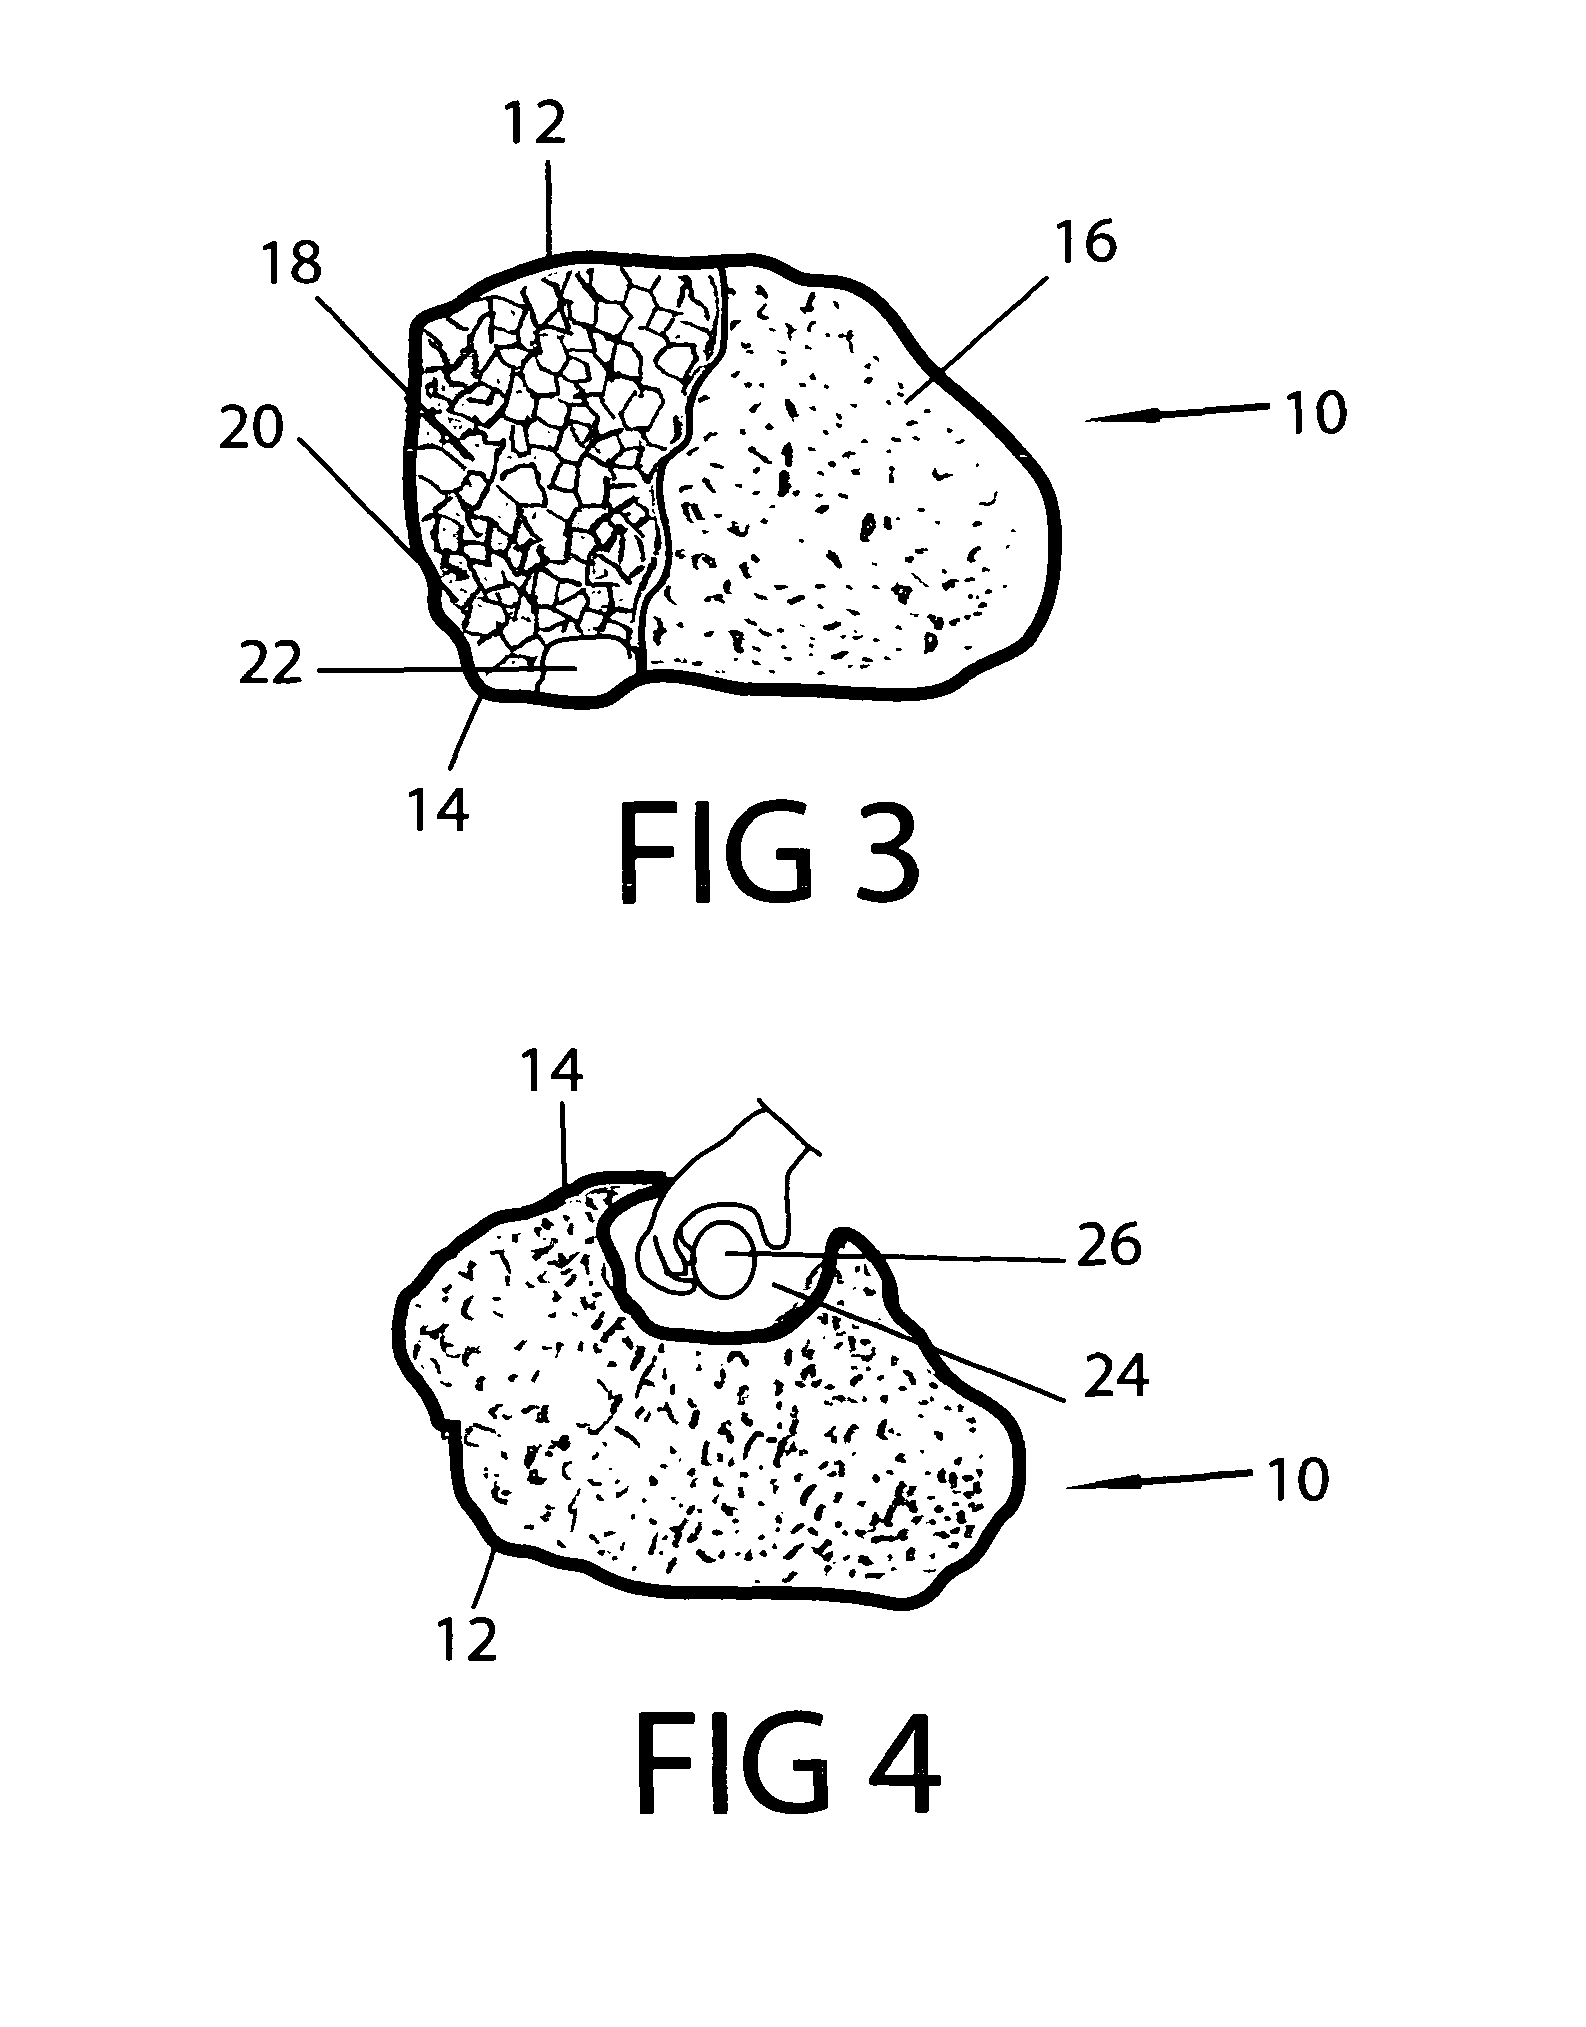 Method of making an artificial hollow core boulder filled with non-biodegradable waste